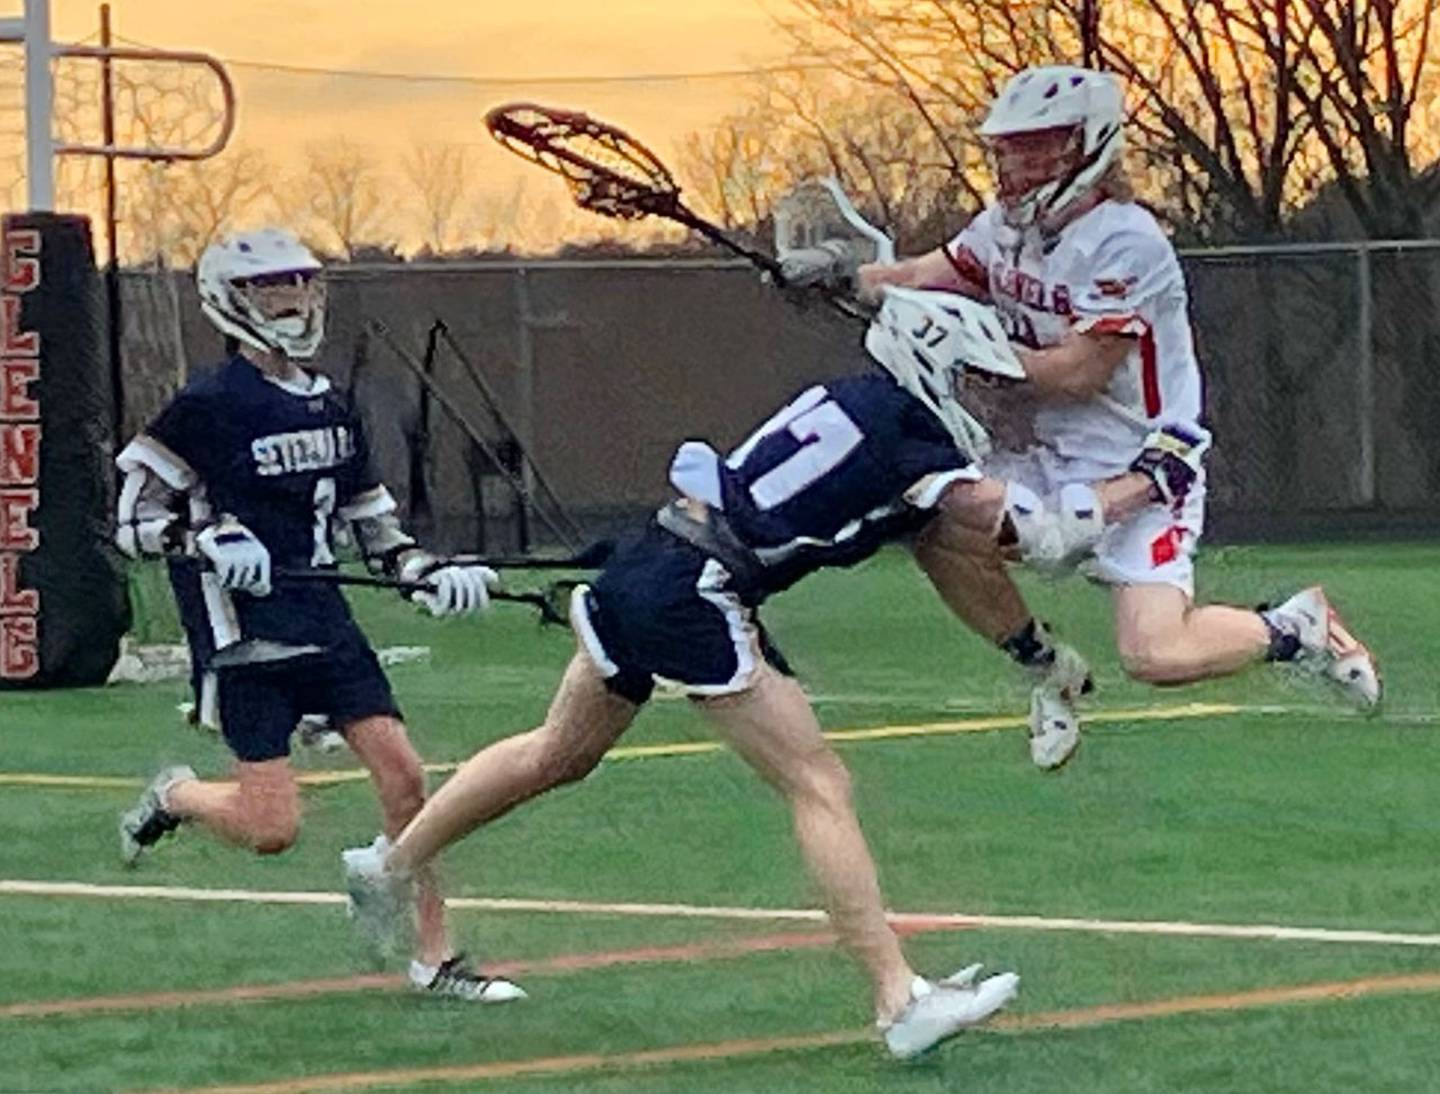 Severna Park junior attackman Kenny Brazil shows what riding is all about as he checks Glenelg sophomore goalie Zach Coughlin while Falcon sophomore midfielder Jack Fish arrives on the scene. No. 9 Severna Park won the inter-county battle, 11-3, over the Gladiators.